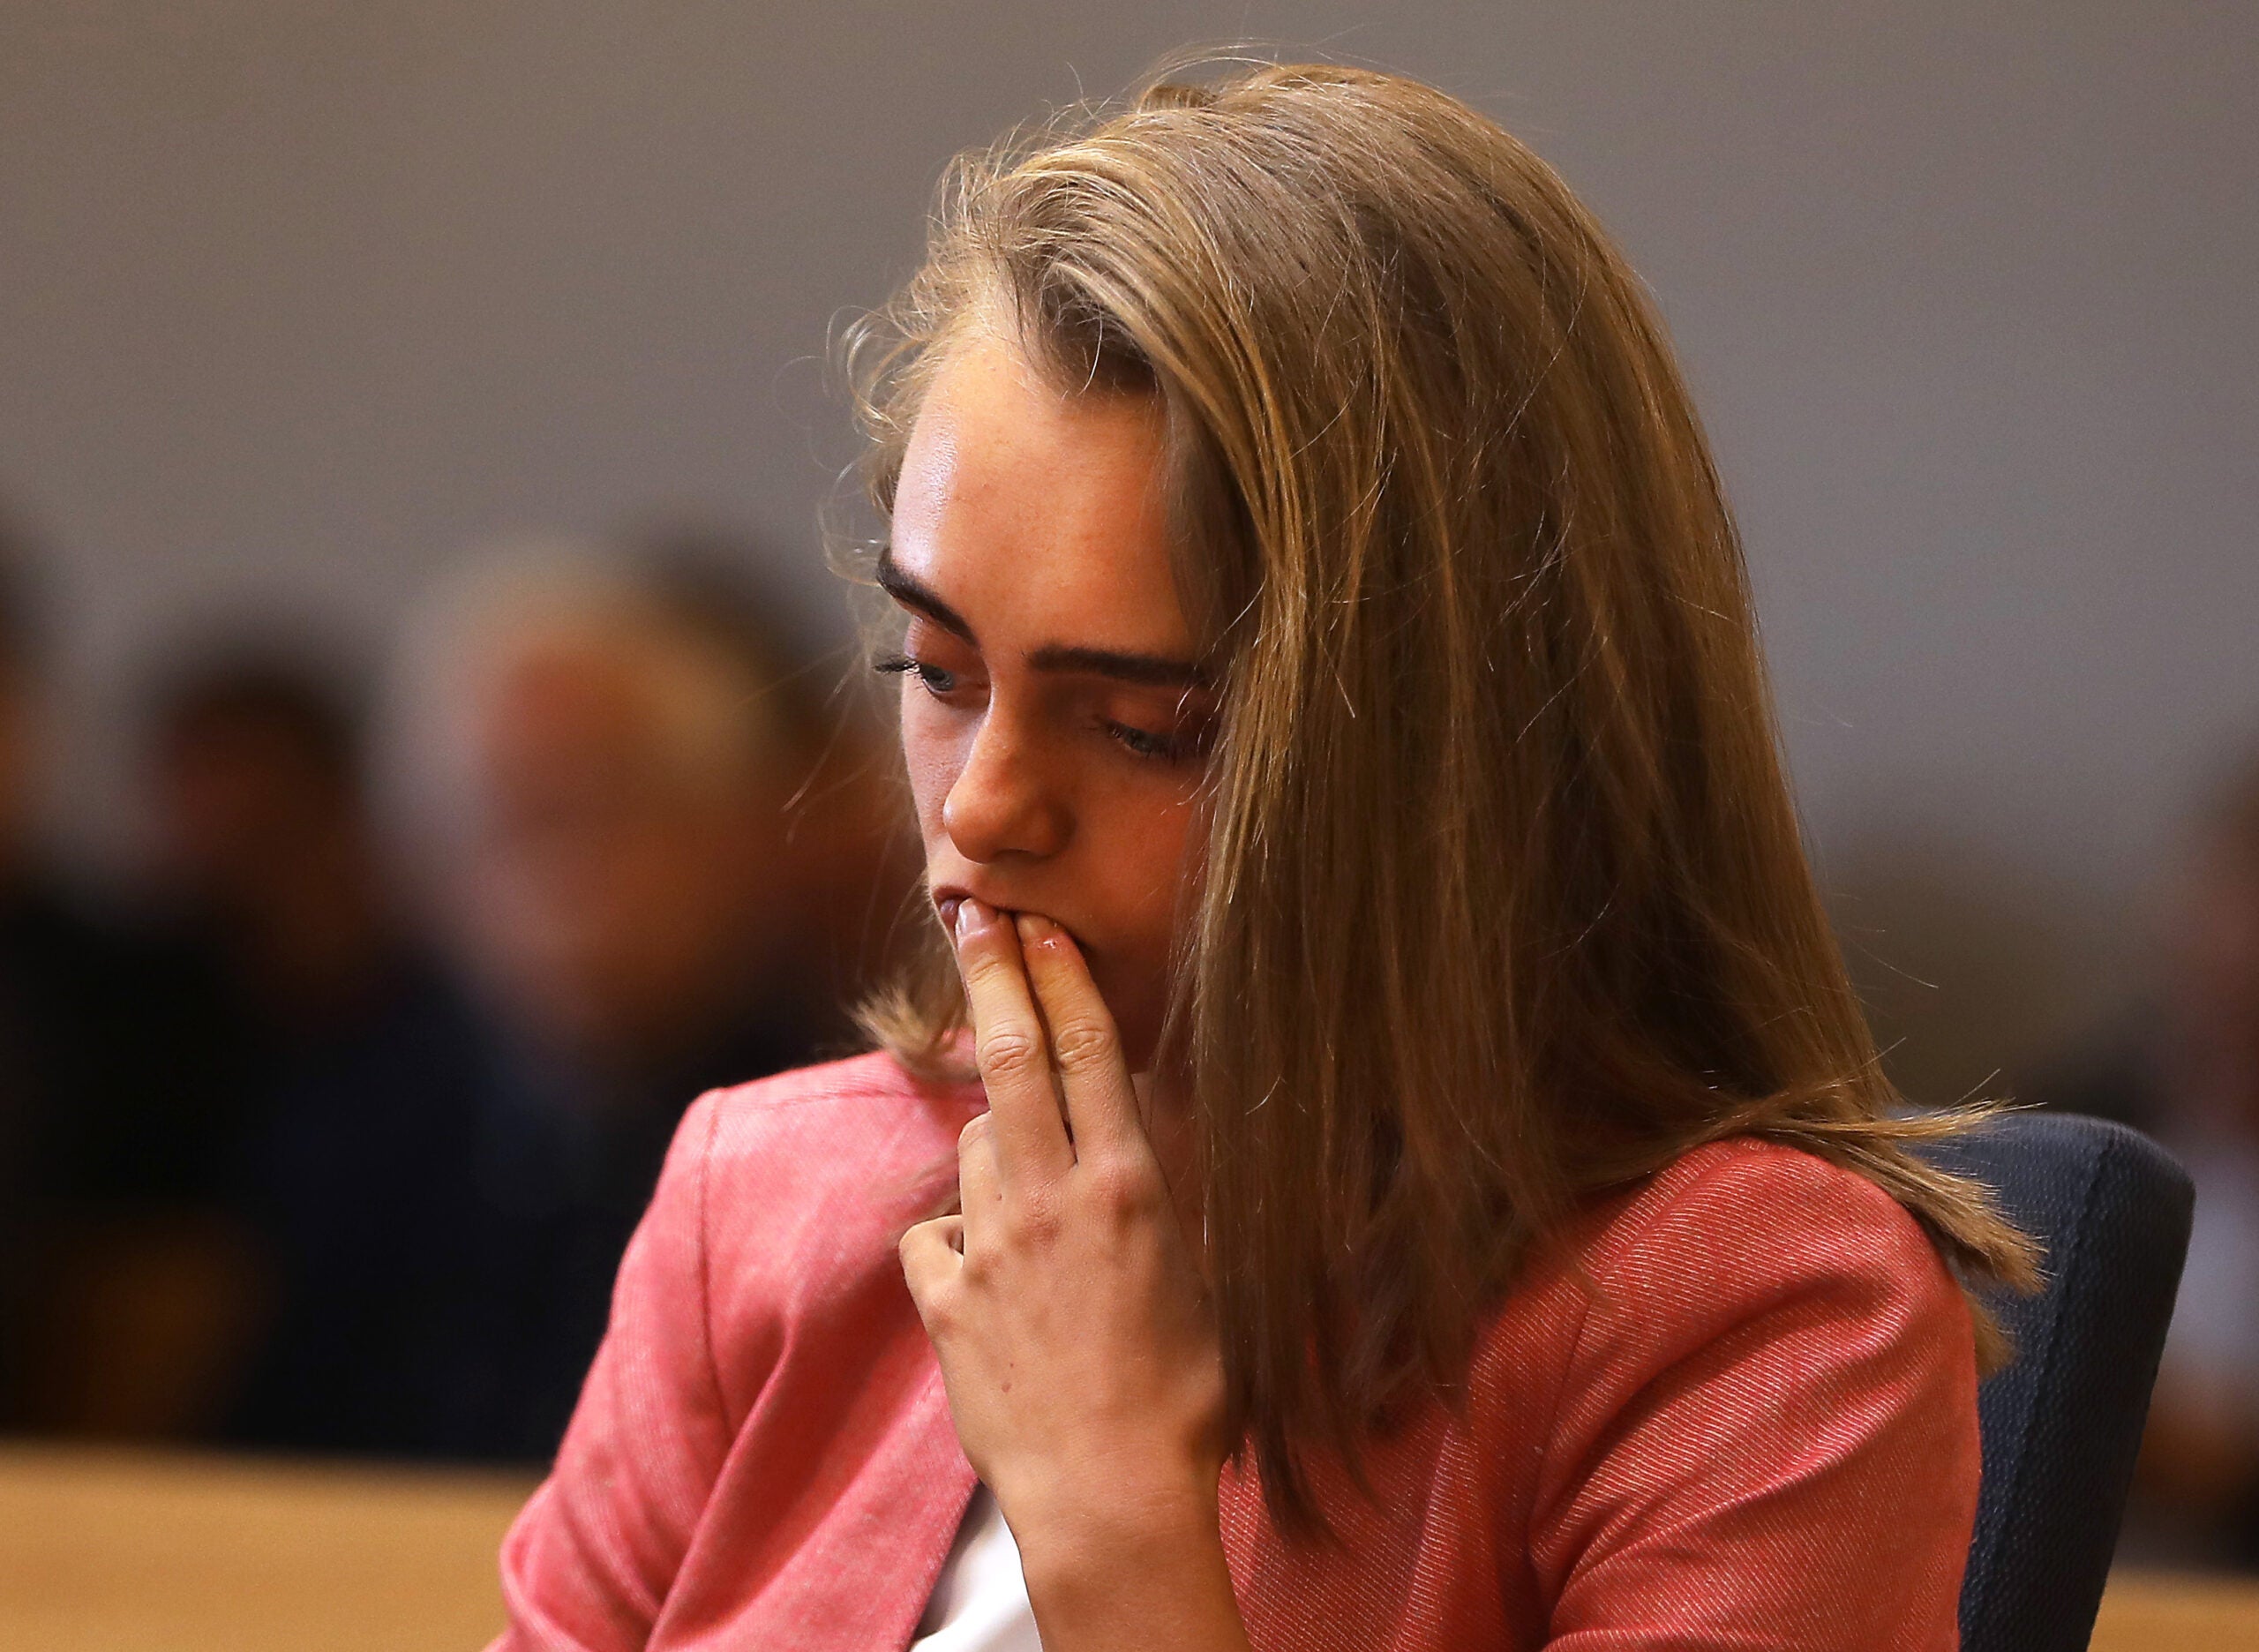 Shes Accused Of Texting Him To Suicide Is That Enough To Convict